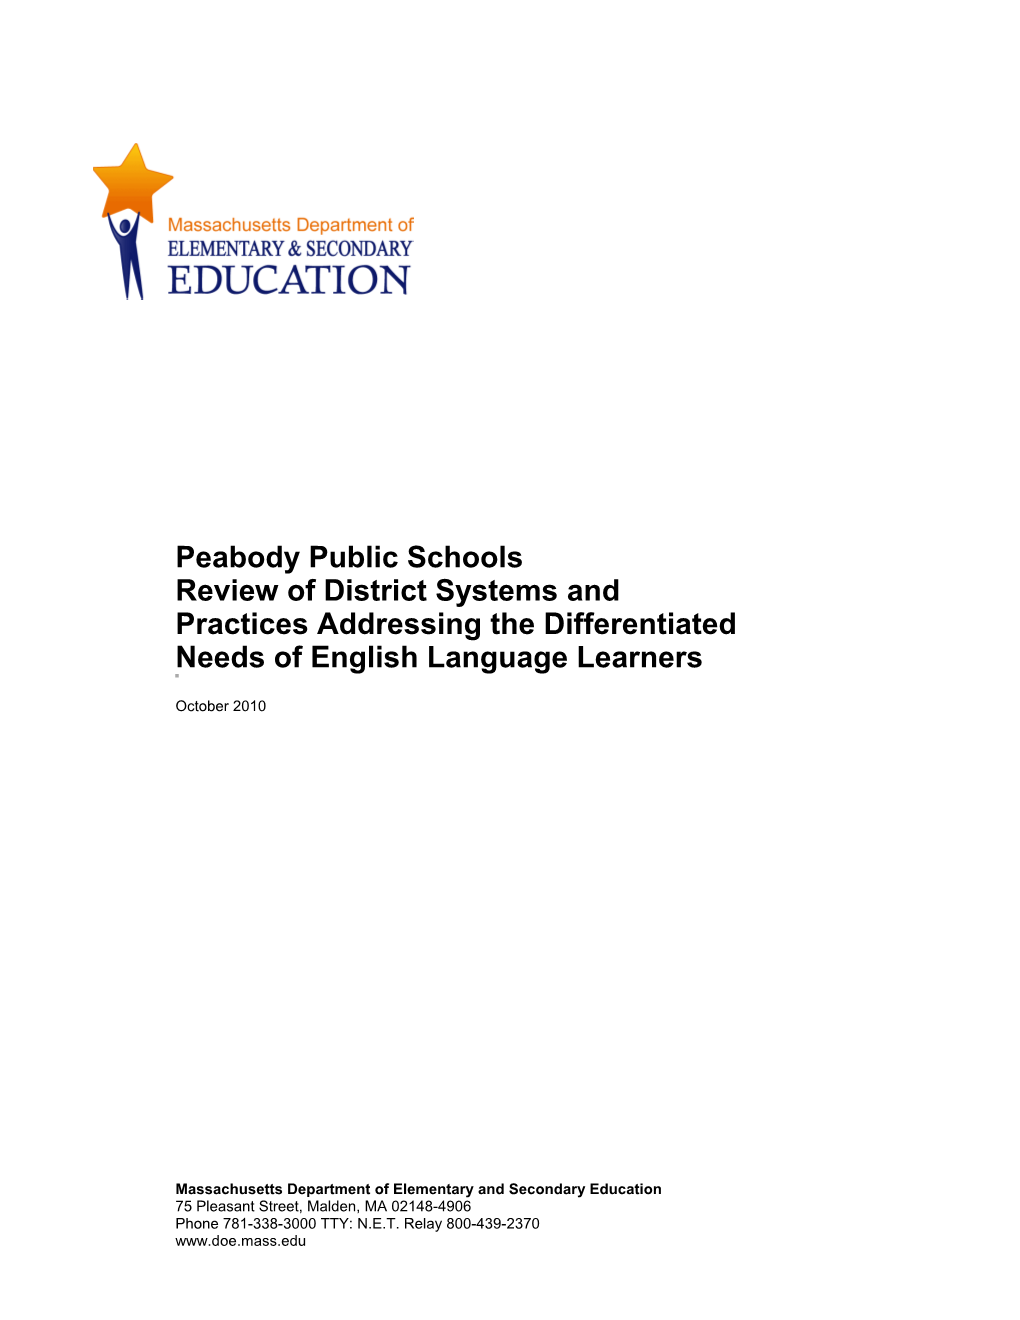 Peabody Public Schools, Differentiated Needs (LEP) Review Report, October 2010